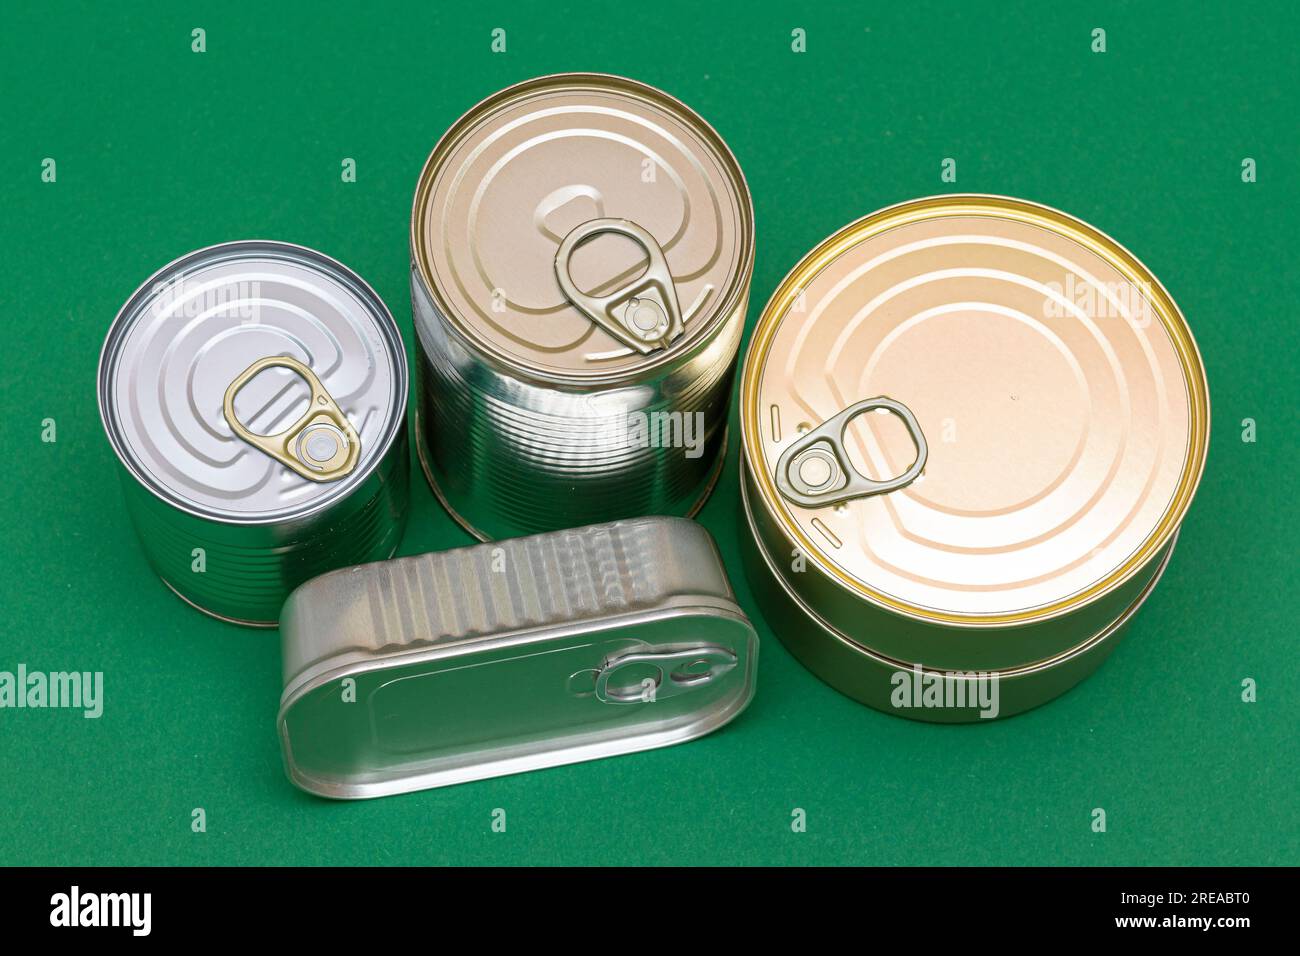 Why are some foods canned in Tin and others in Aluminum?